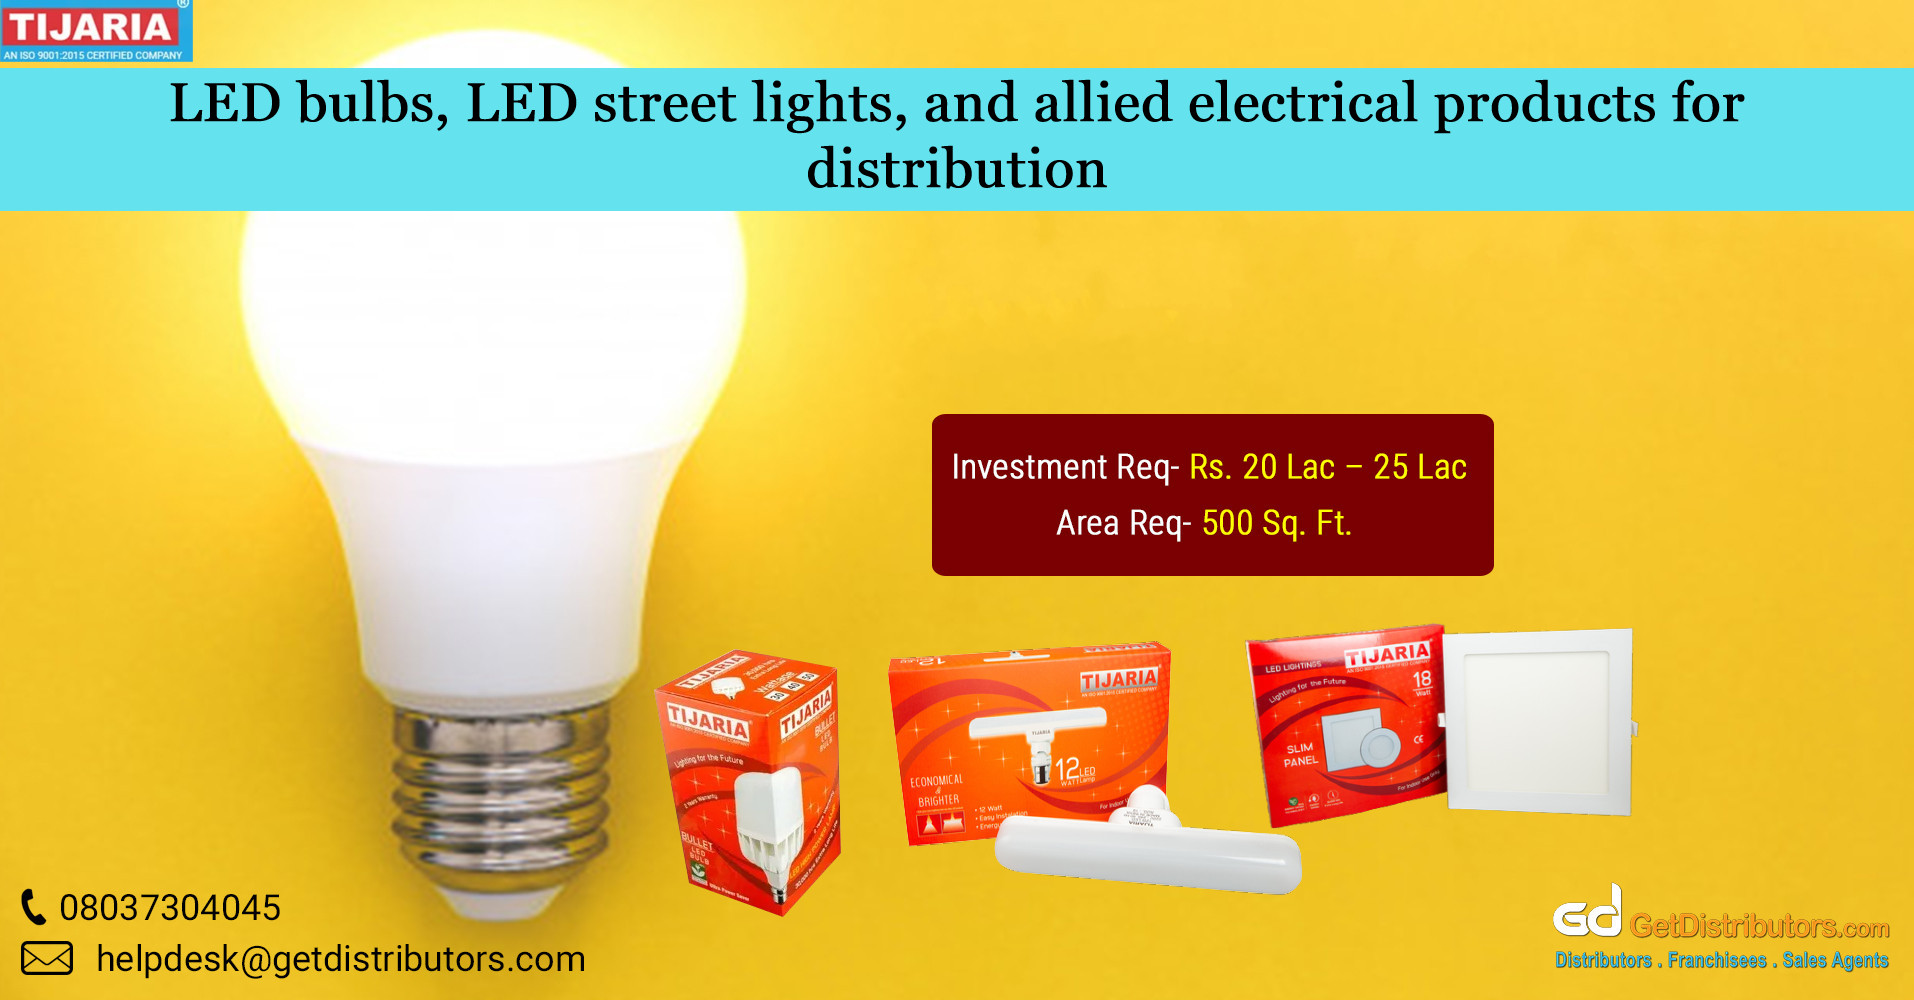 LED bulbs, LED street lights, and allied electrical products for distribution